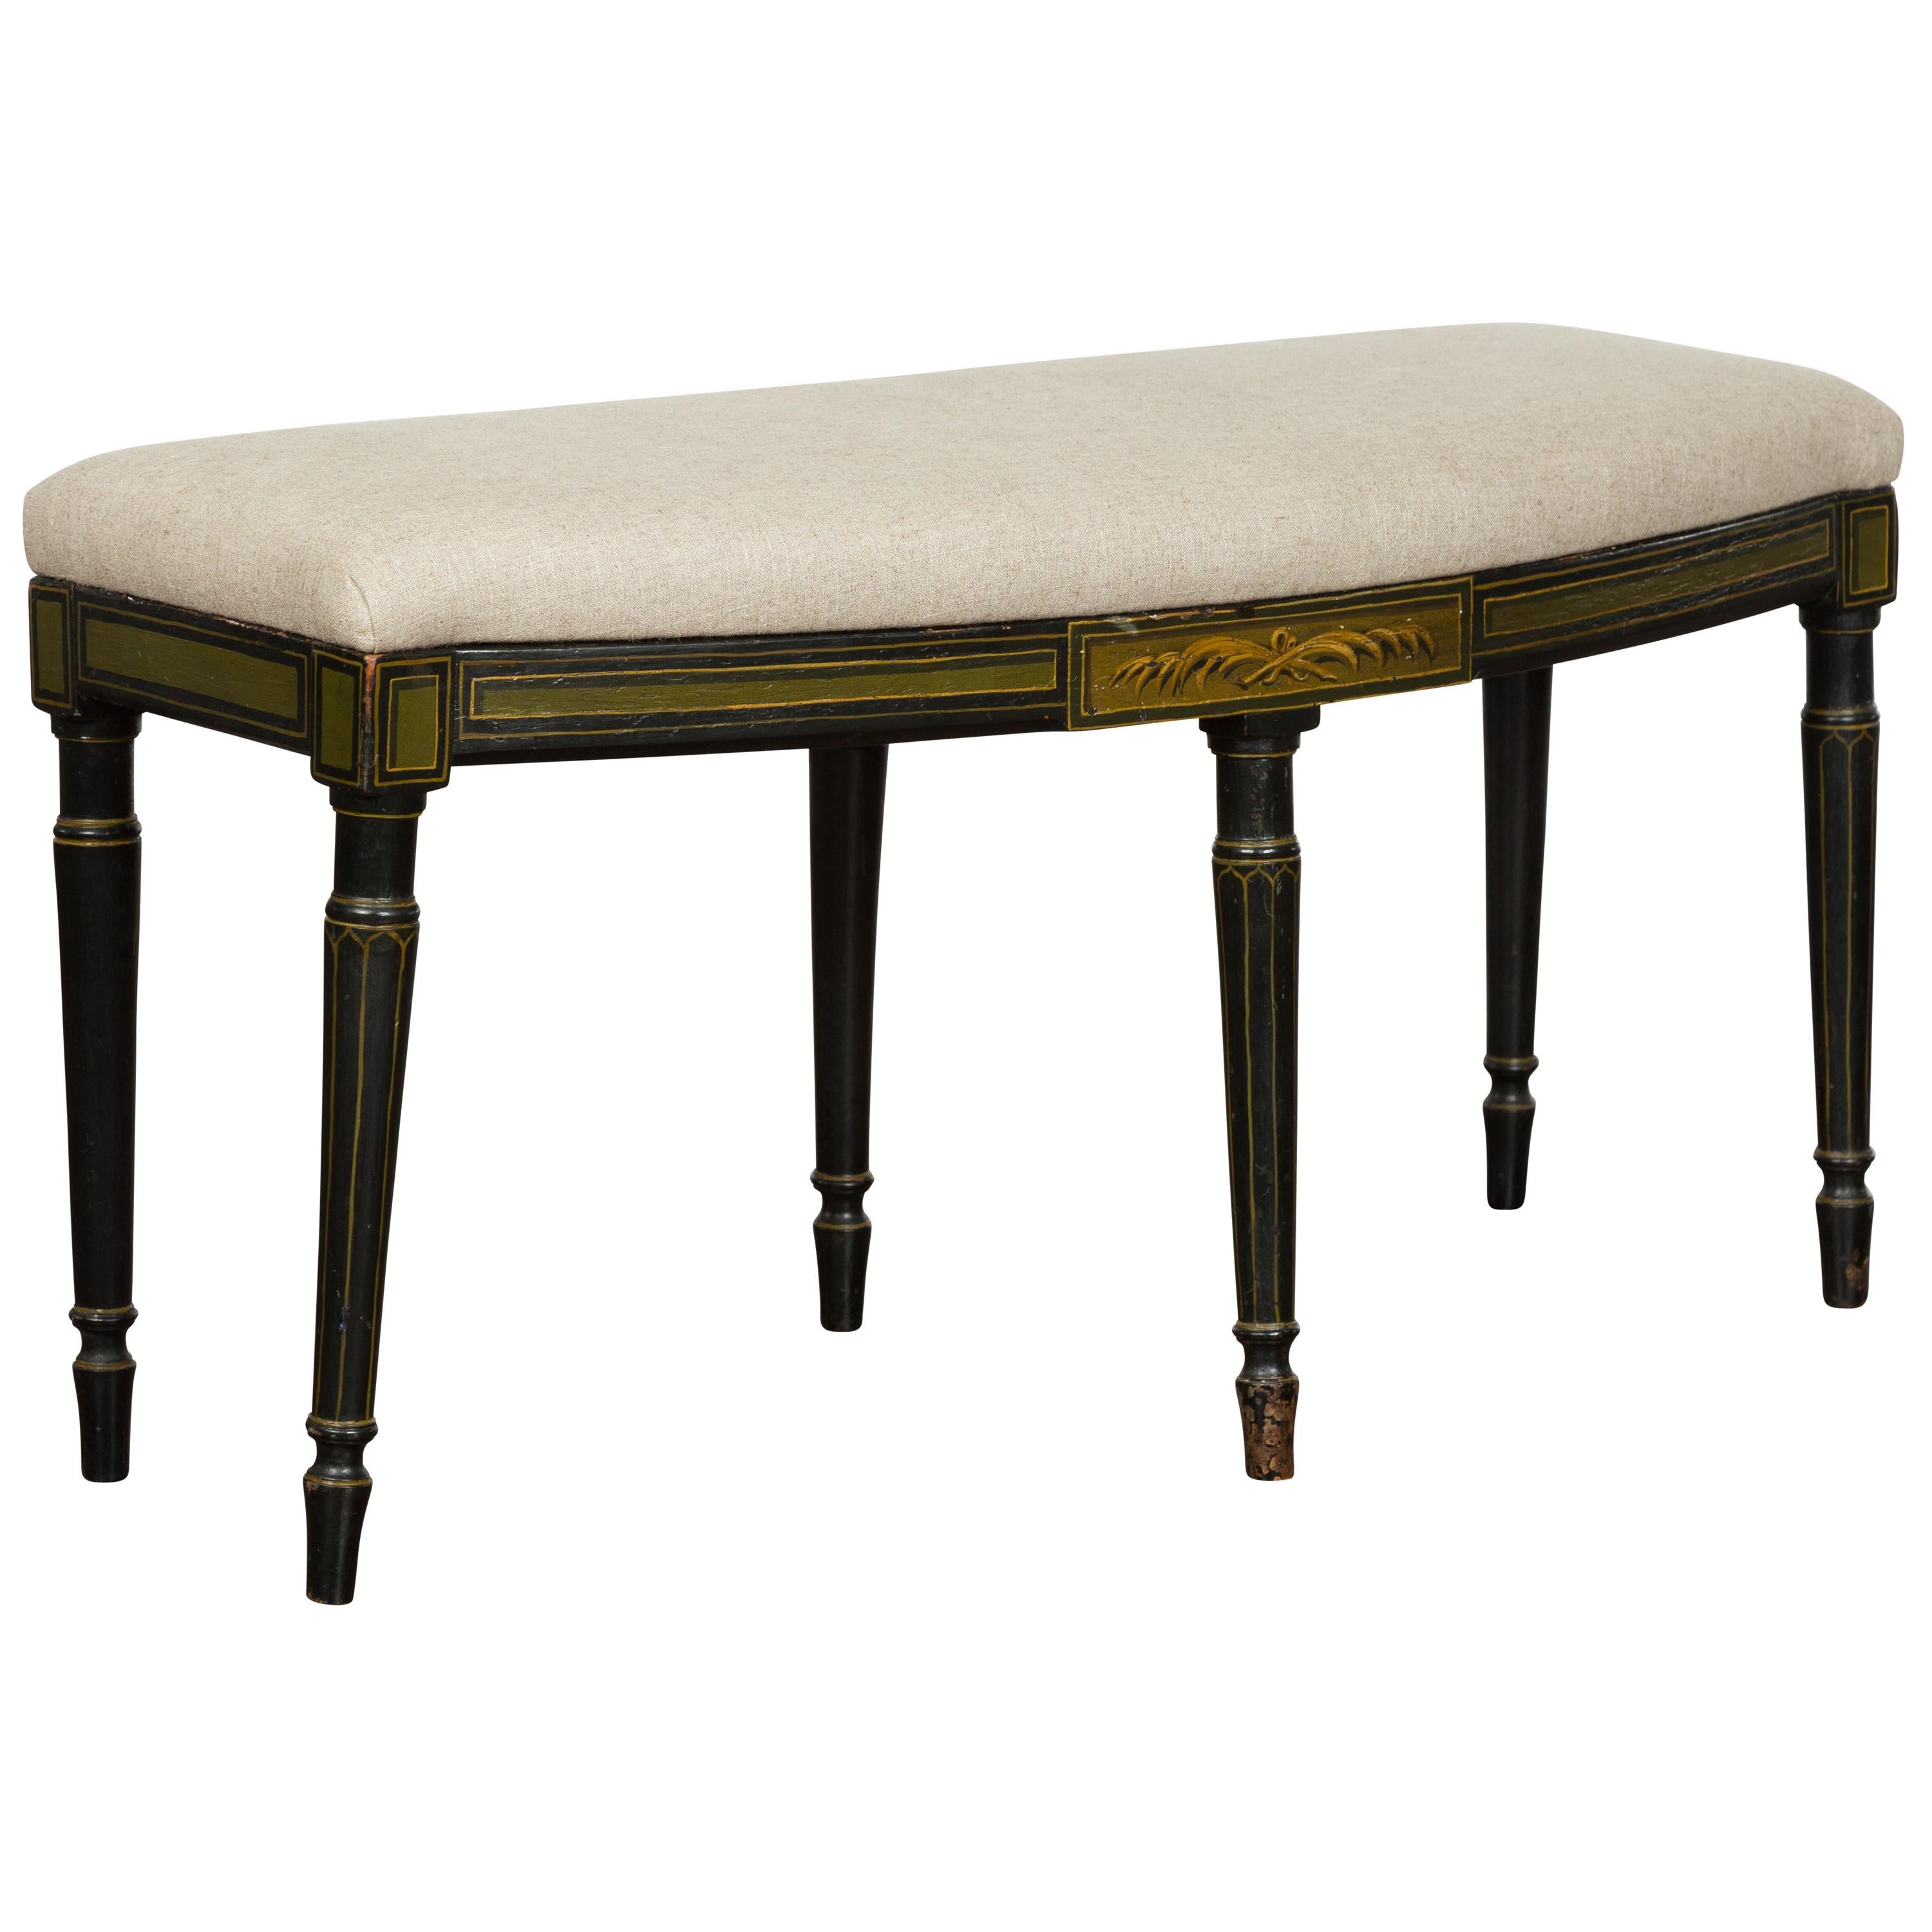 English 1820s Regency Period Black Bench with Painted Foliage and New Upholstery